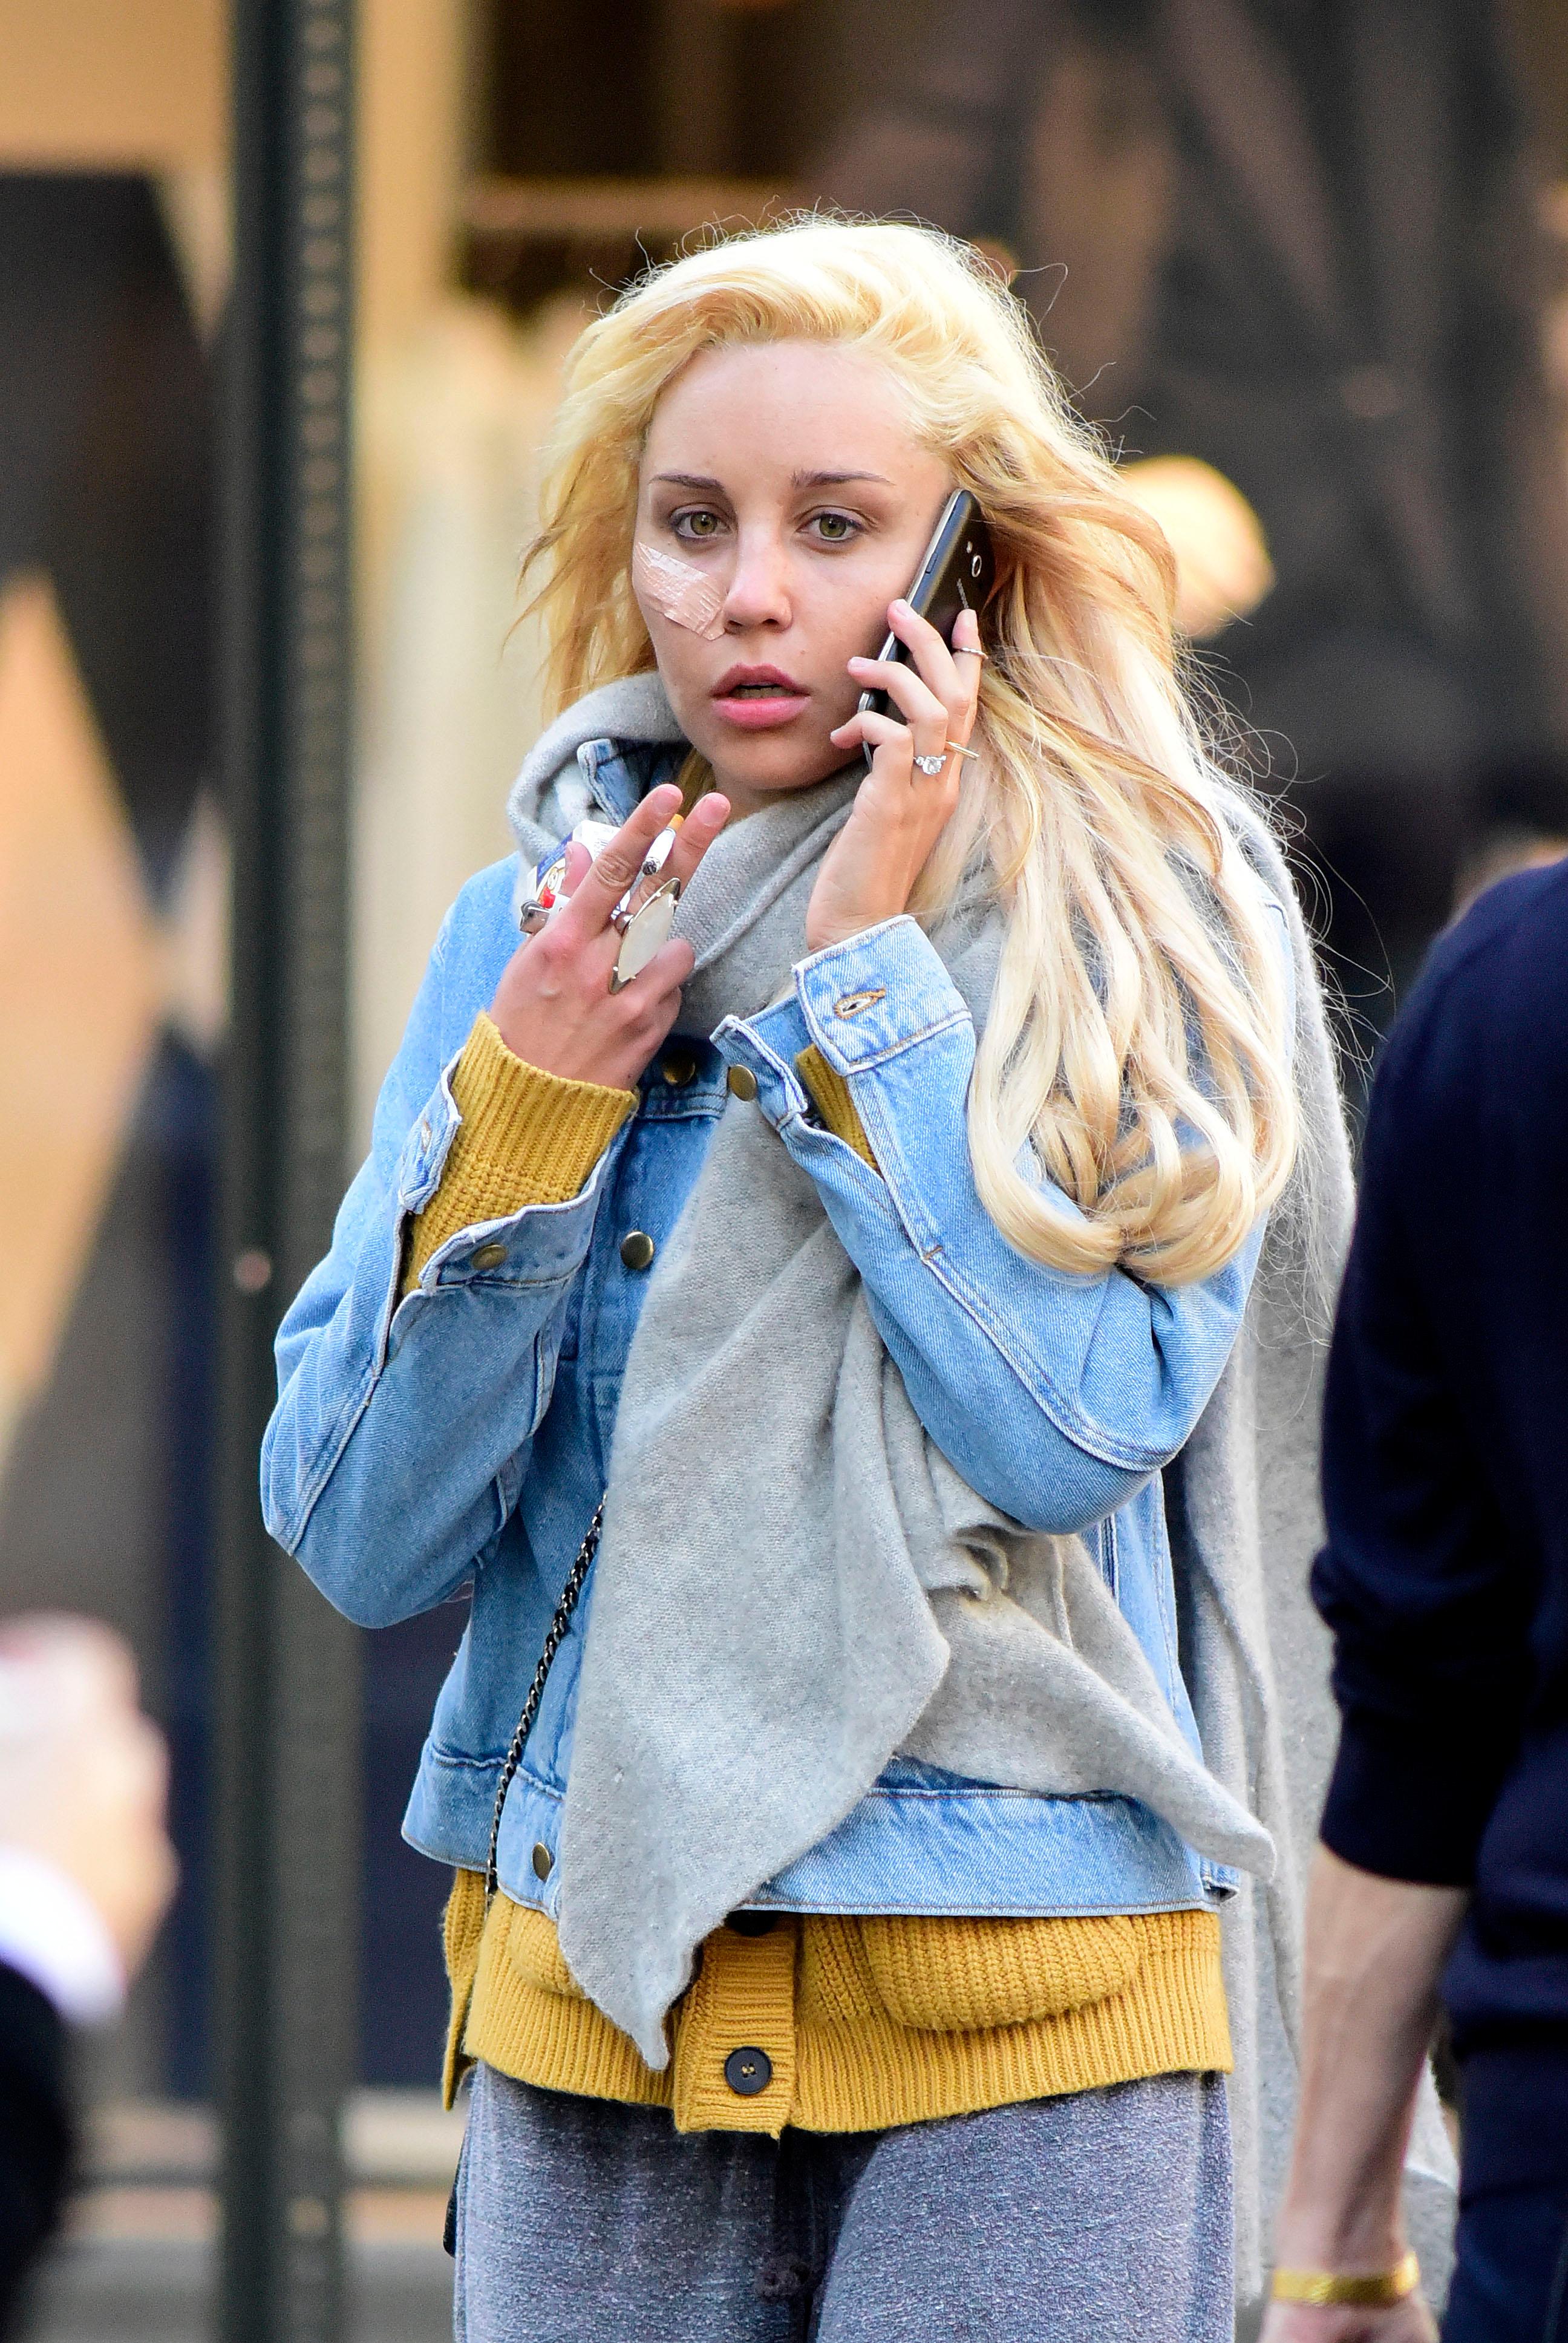 EXCLUSIVE: Amanda Bynes smokes while walking on Madison Avenue in New York City